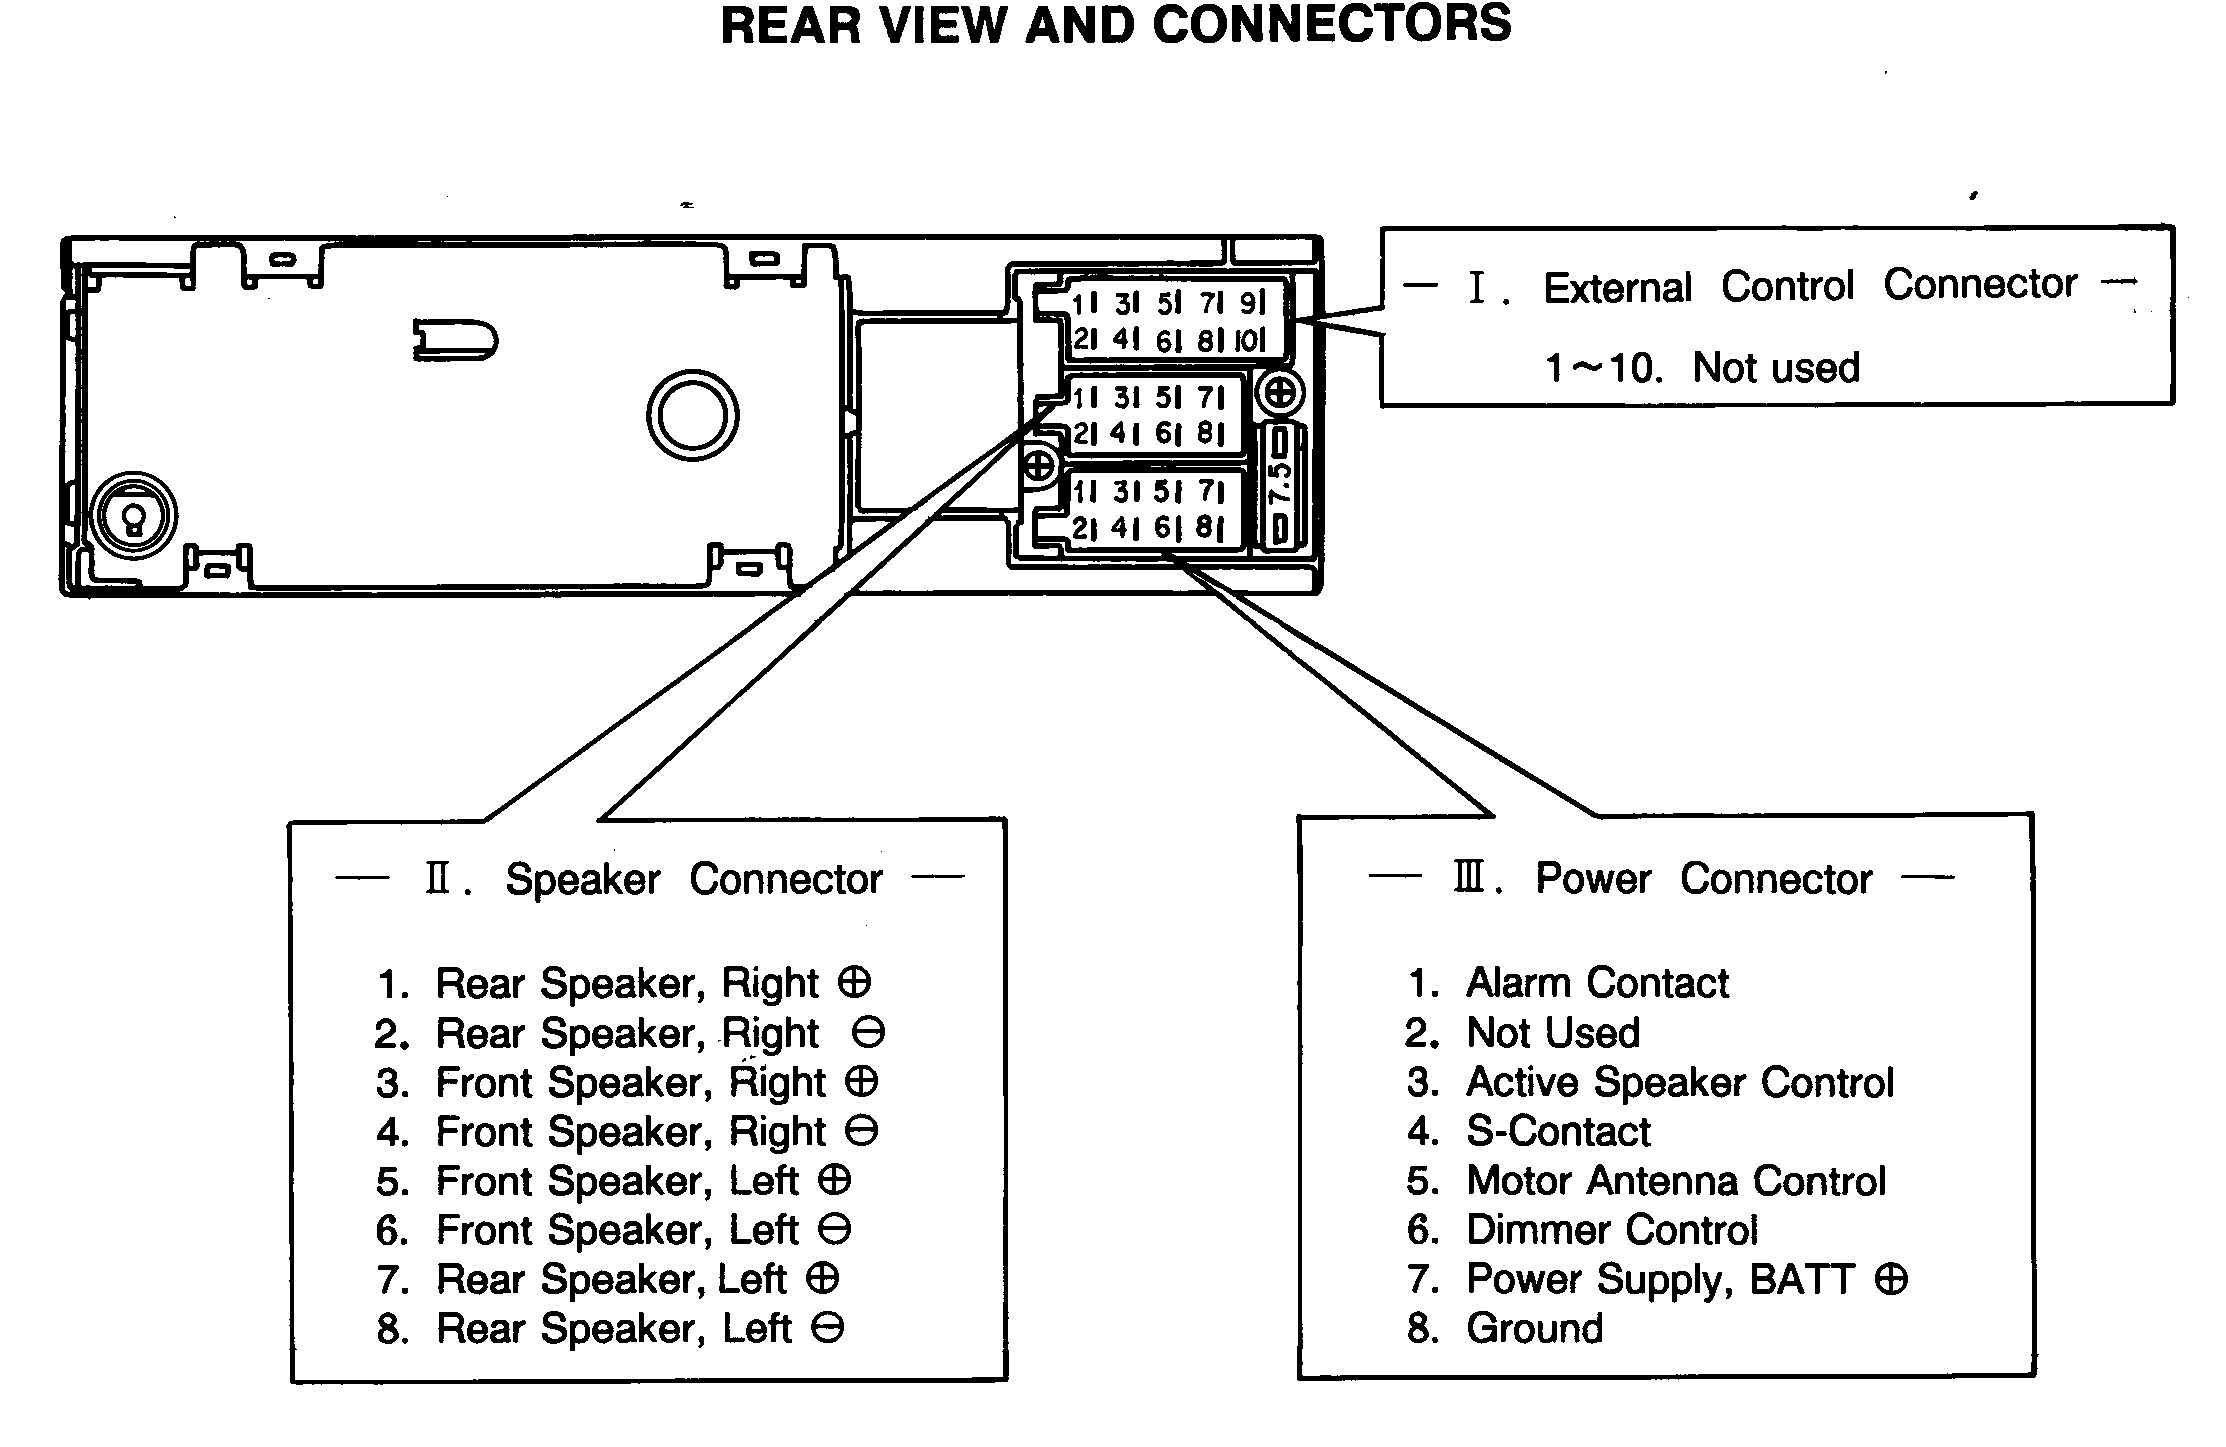 Audiovox Car Stereo Wiring Diagram from mainetreasurechest.com